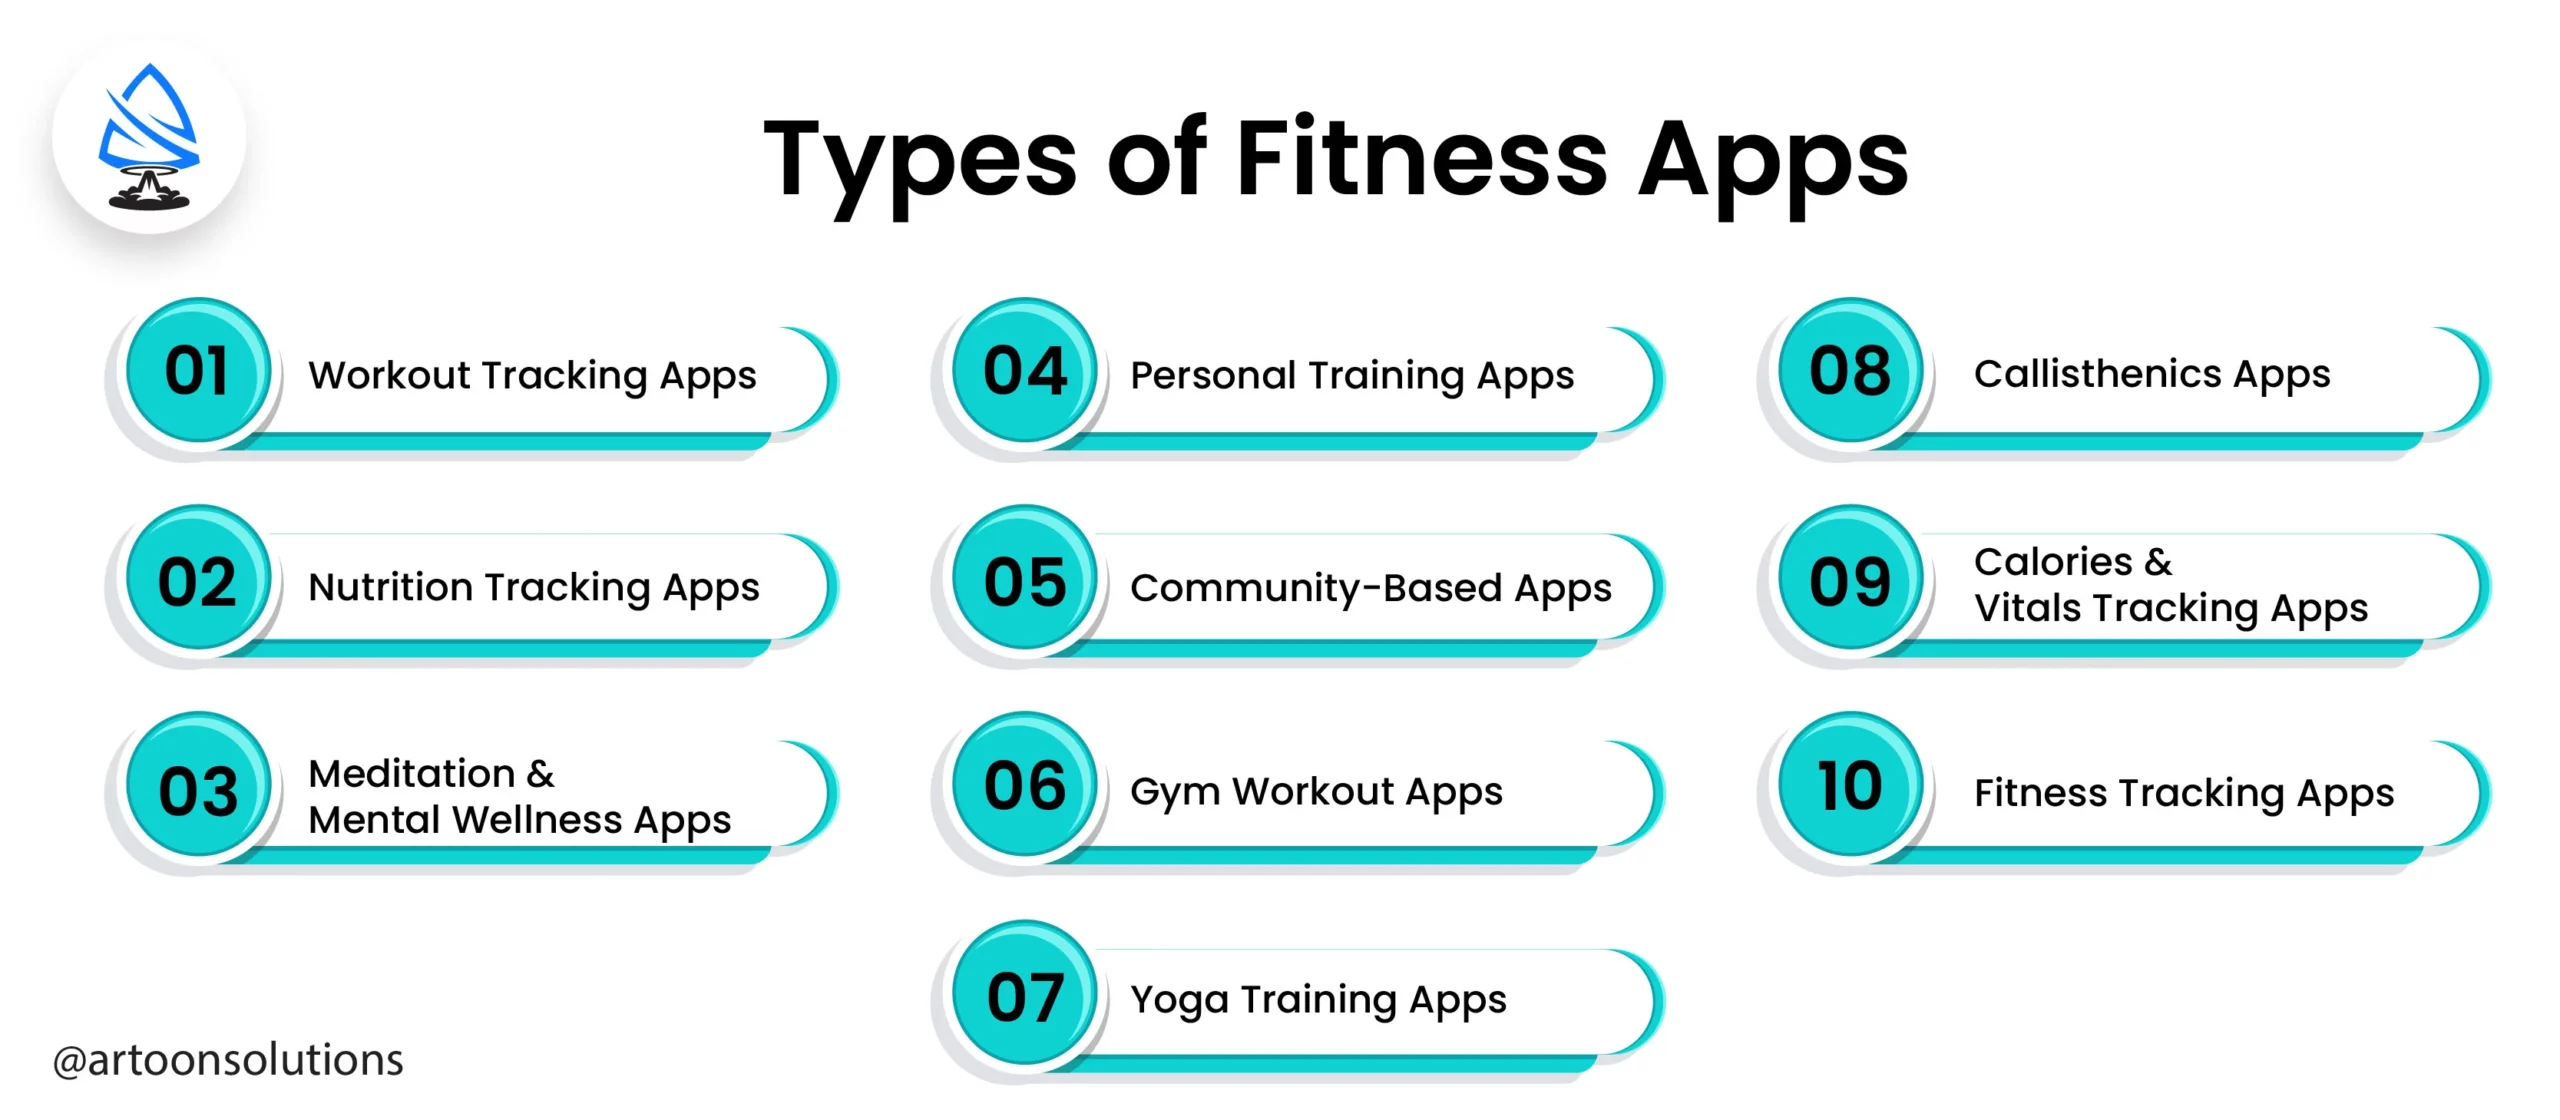 Types of Fitness Apps